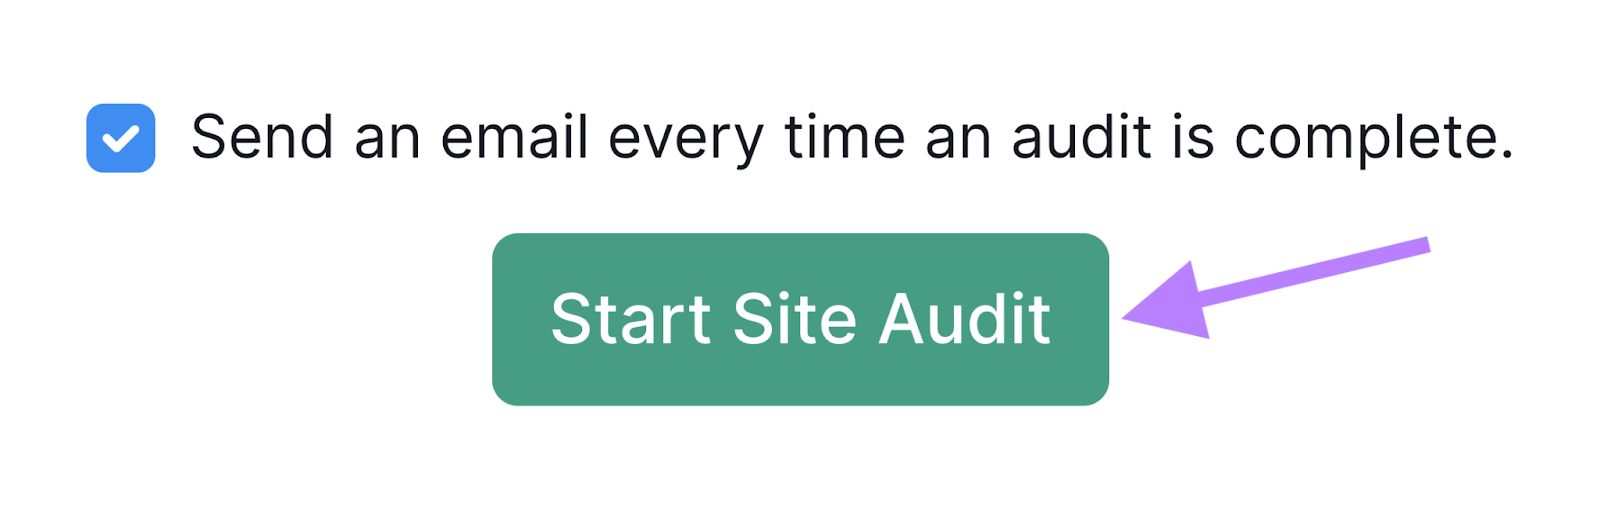 “Start Site Audit” button highlighted